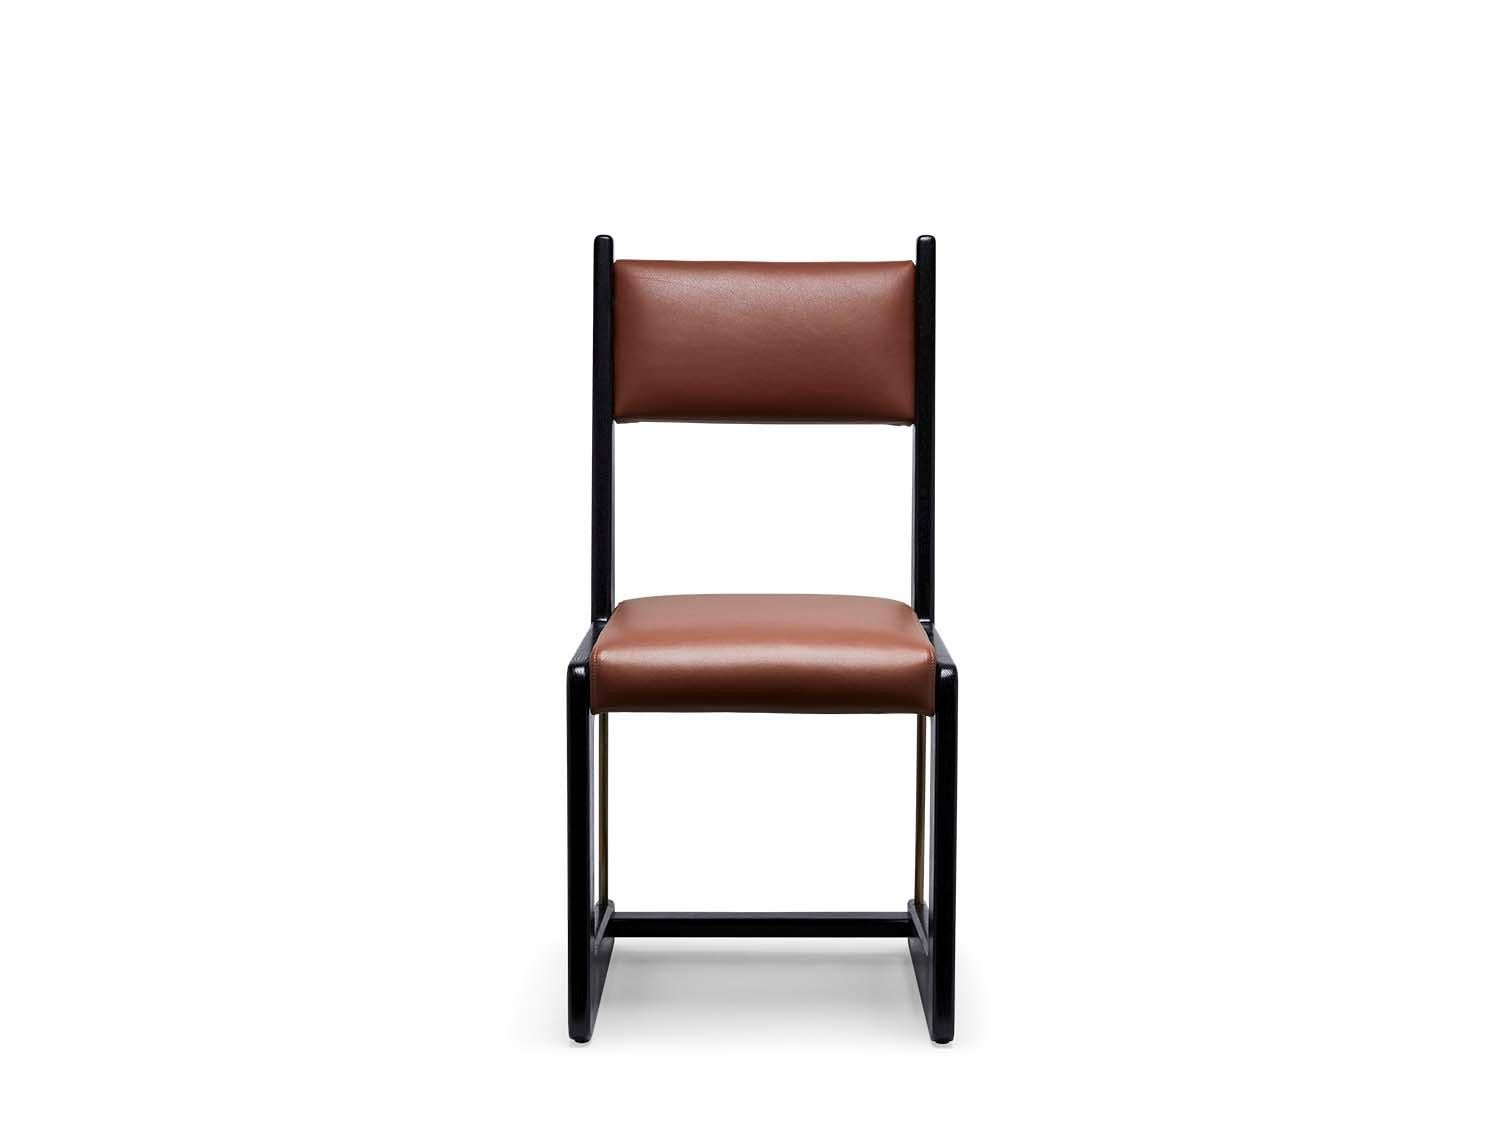 The Cruz dining chair is made from a solid American walnut or white oak frame that features a cantilevered shape and lacquered brass stretchers. The seat is upholstered.

The Lawson-Fenning Collection is designed and handmade in Los Angeles,